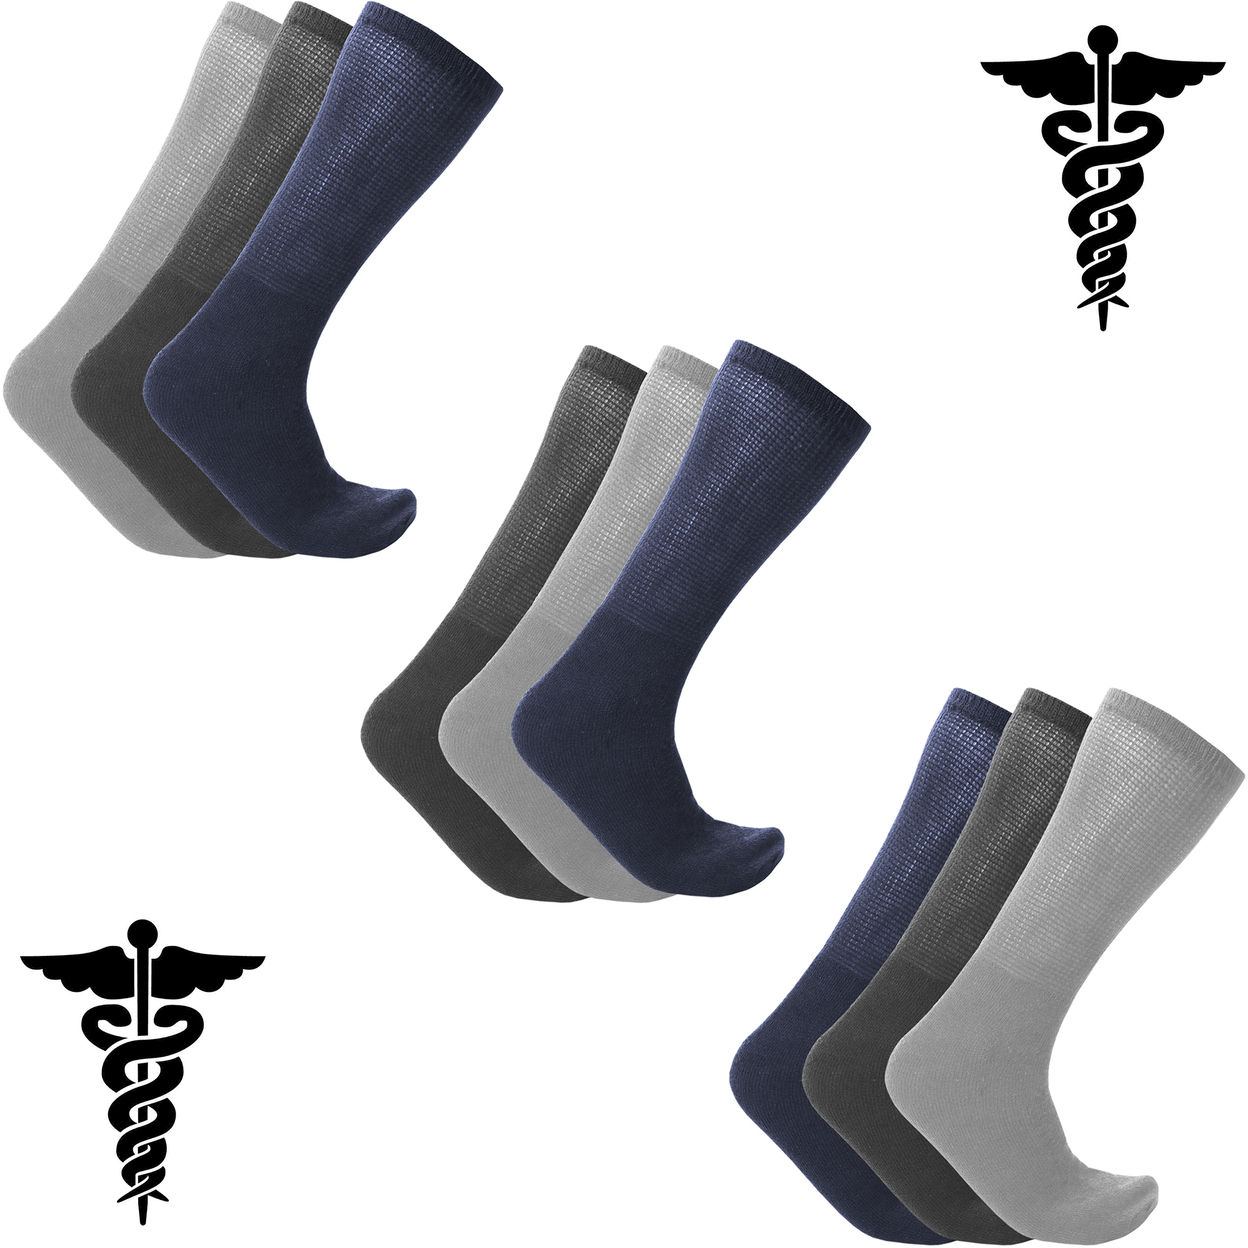 6-Pairs: Physician Approved Non-Binding Neuropathy Diabetic Crew Circulatory Socks - Assorted